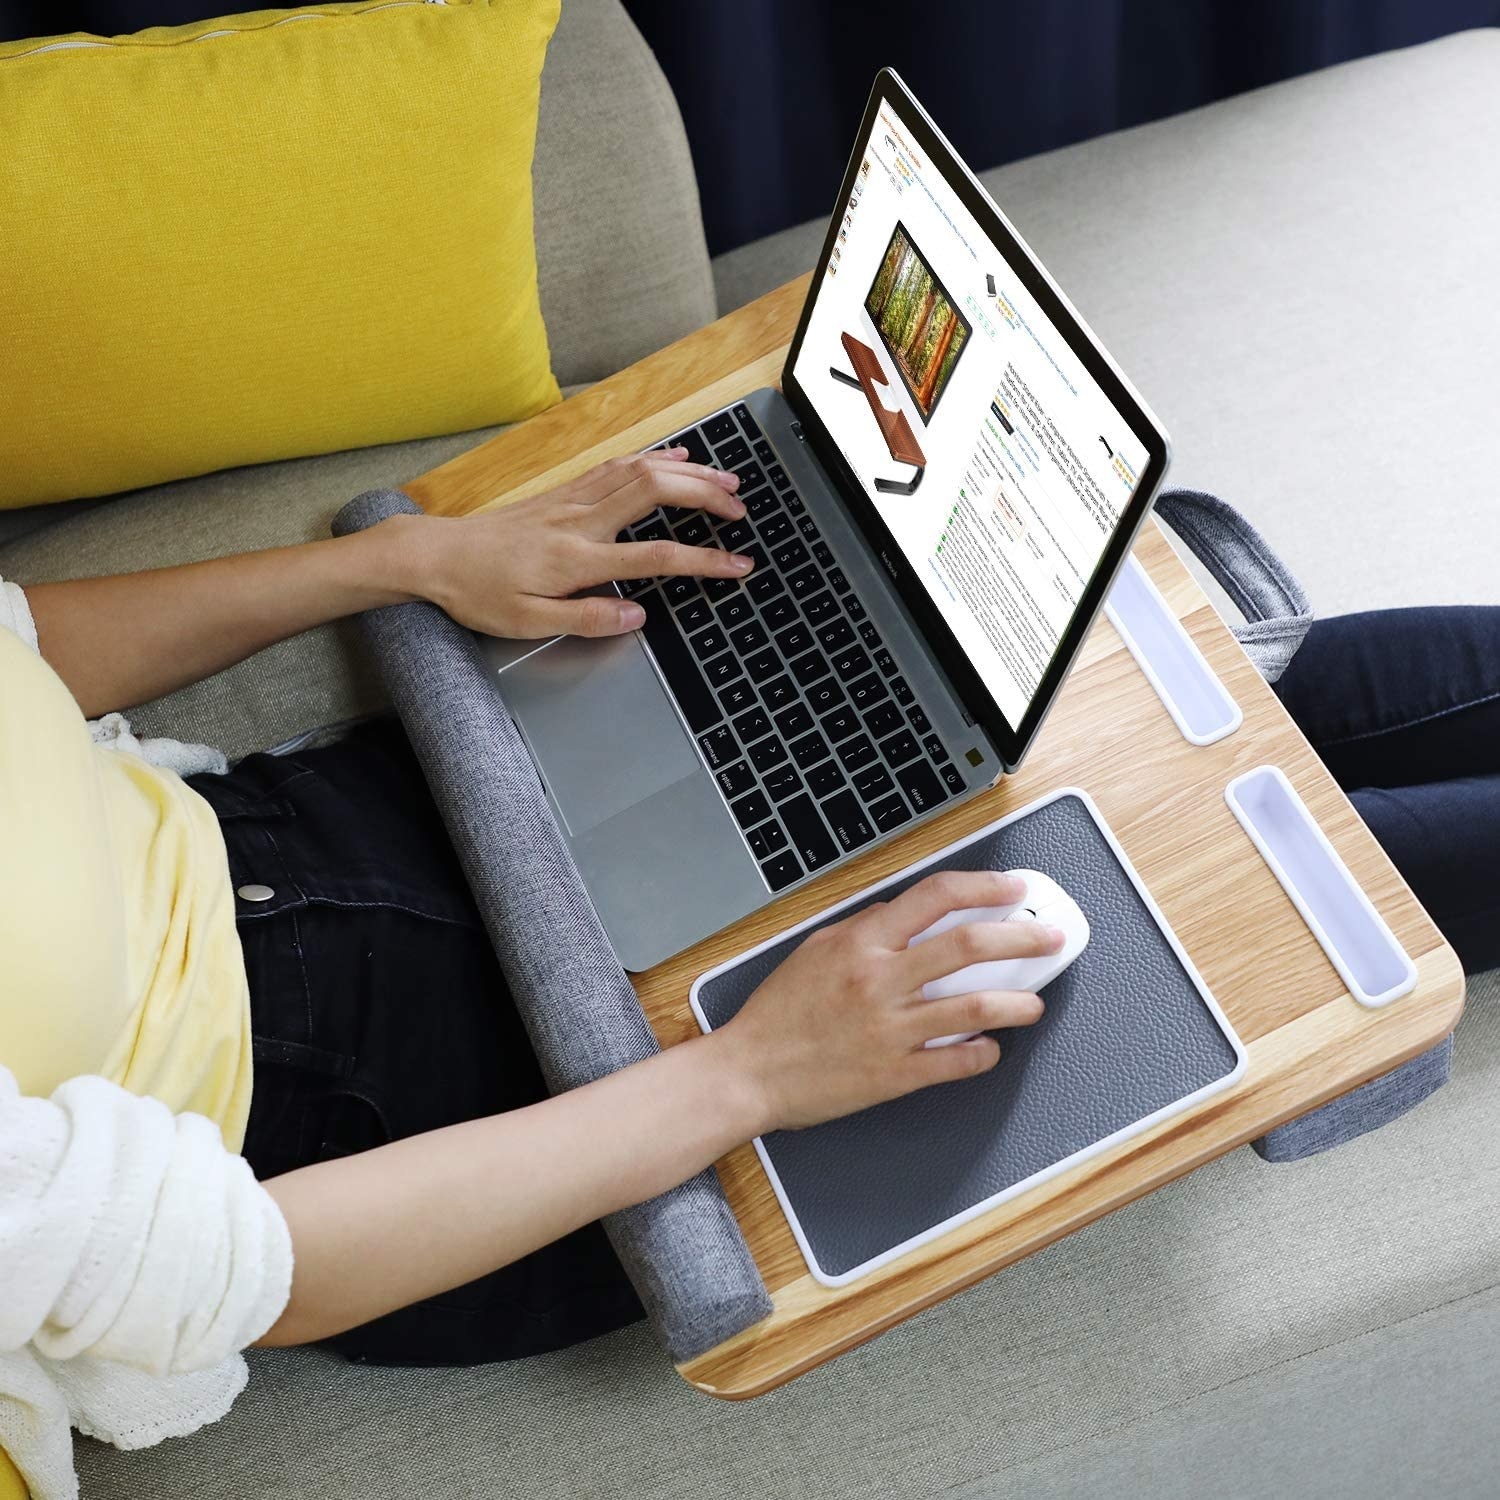 A person using their laptop on the lap desk